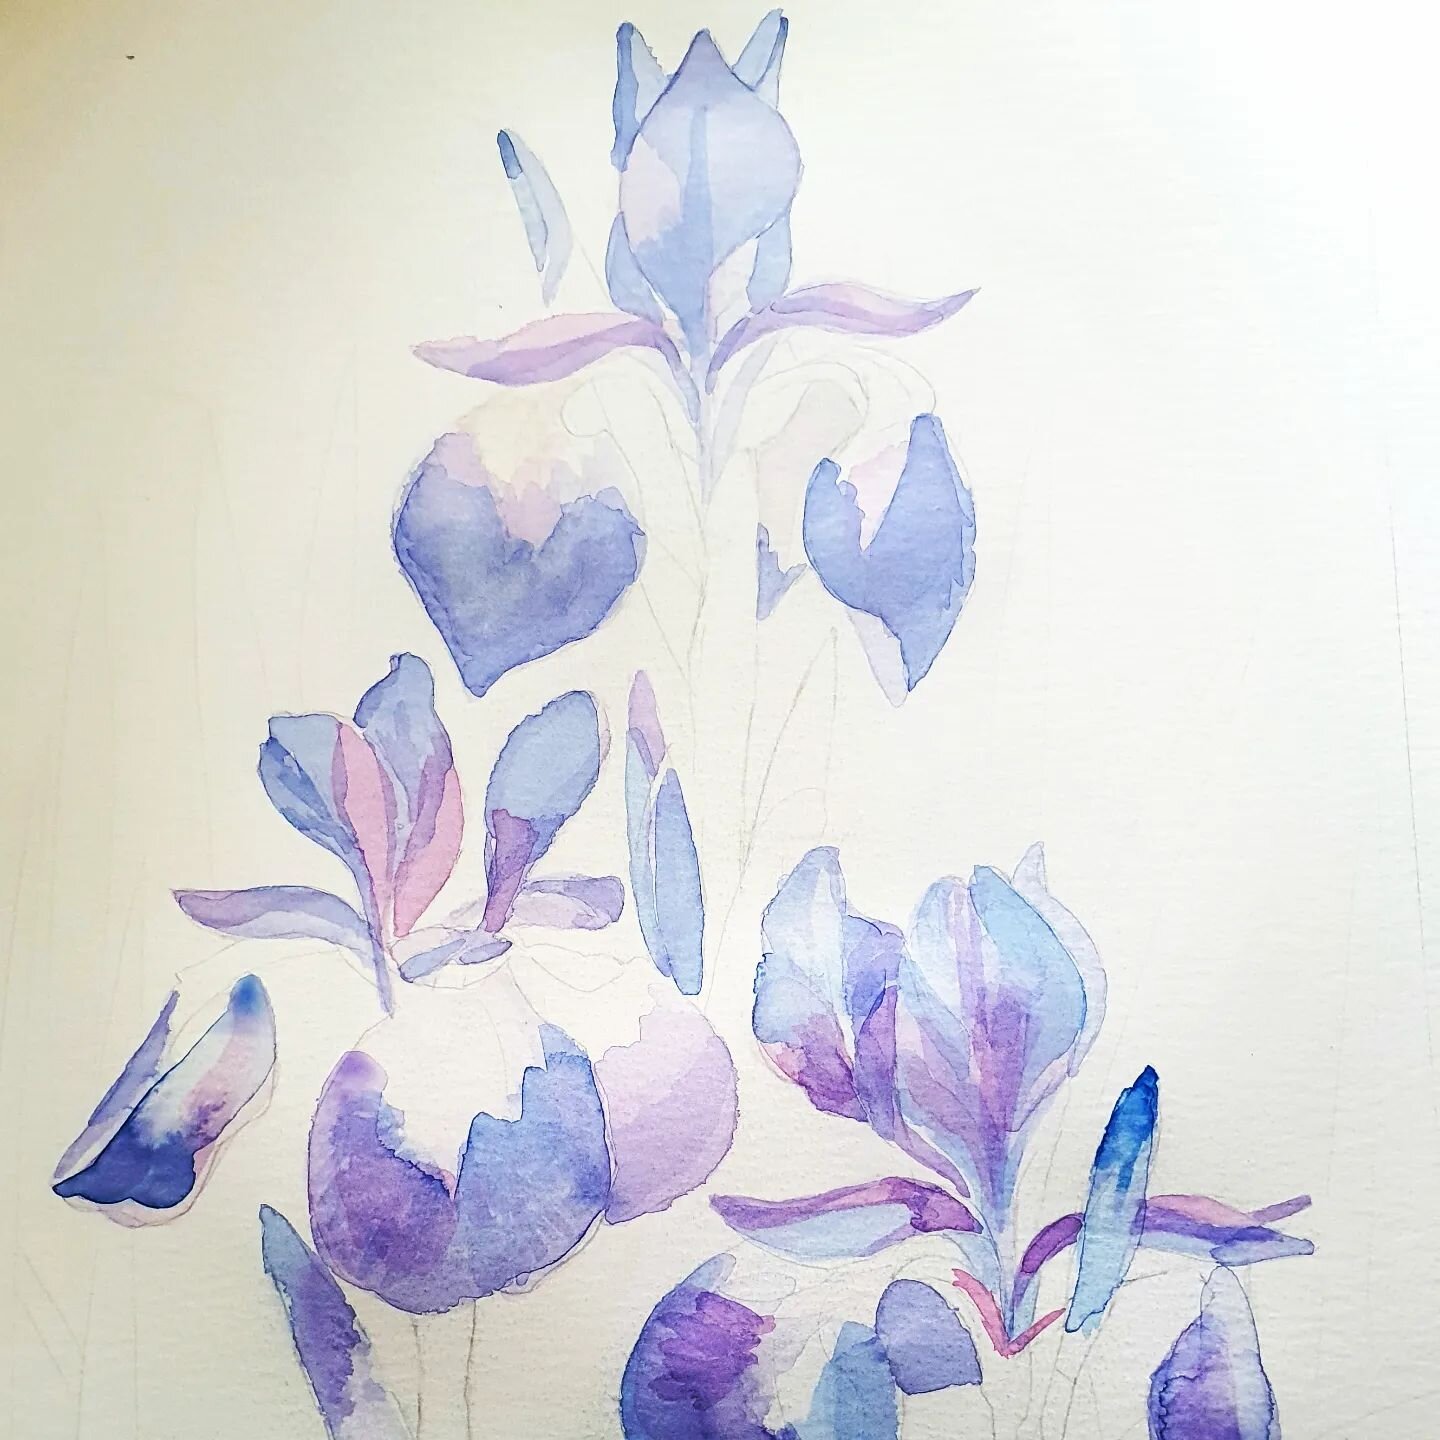 Purple Iris
My latest commission. 
I was asked to produce a picture of a purple iris. 
A subject that I might not have chosen but I love the flower and a challenge. So here it is! 

#artcommission 
#watercolour 
#workingartist 
#botanicalart 
#stilll